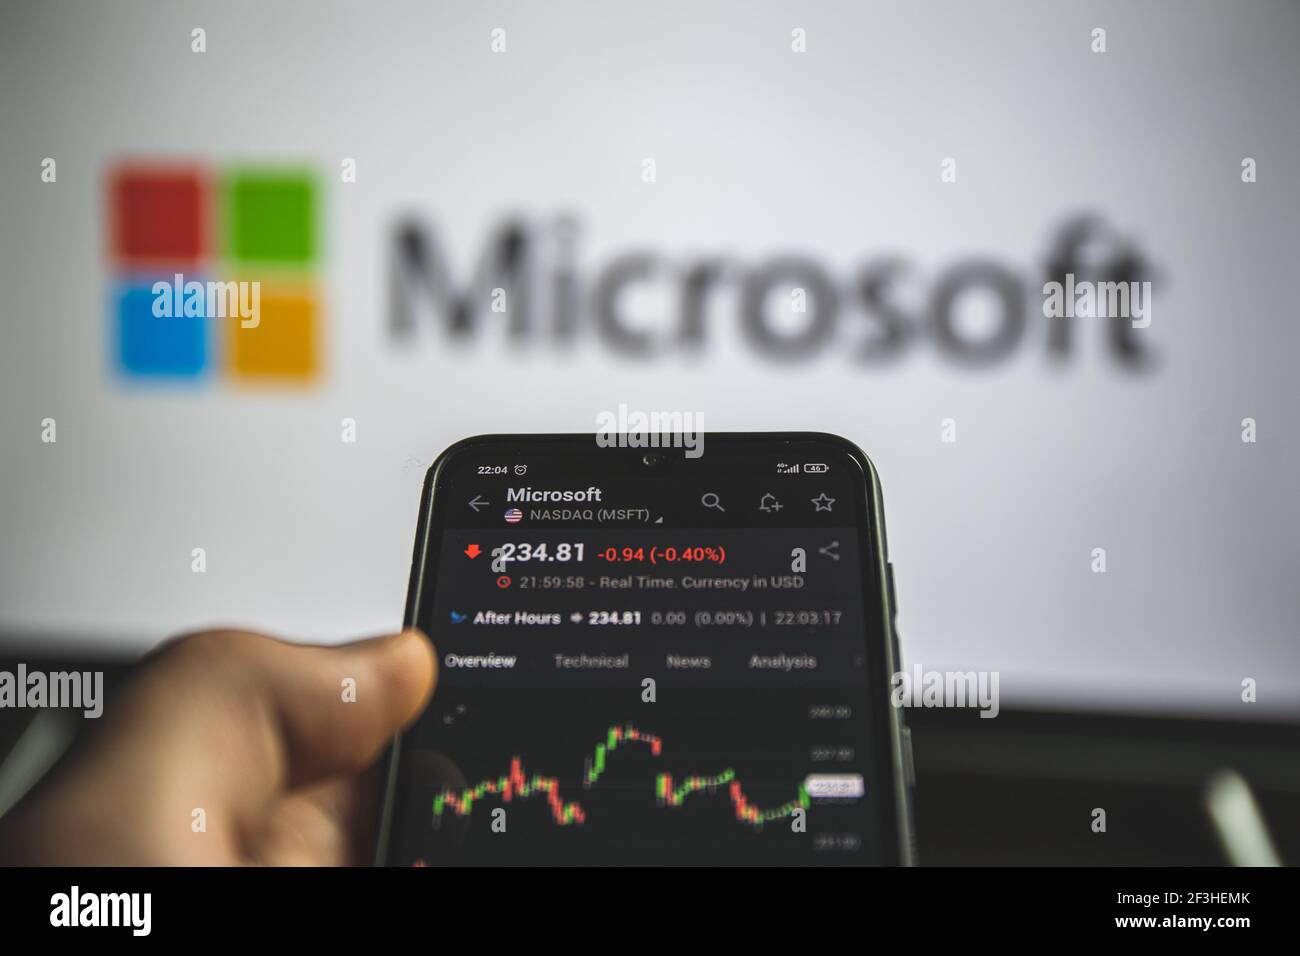 Holding mobile phone with stock market charts of Microsoft company shares Stock Photo